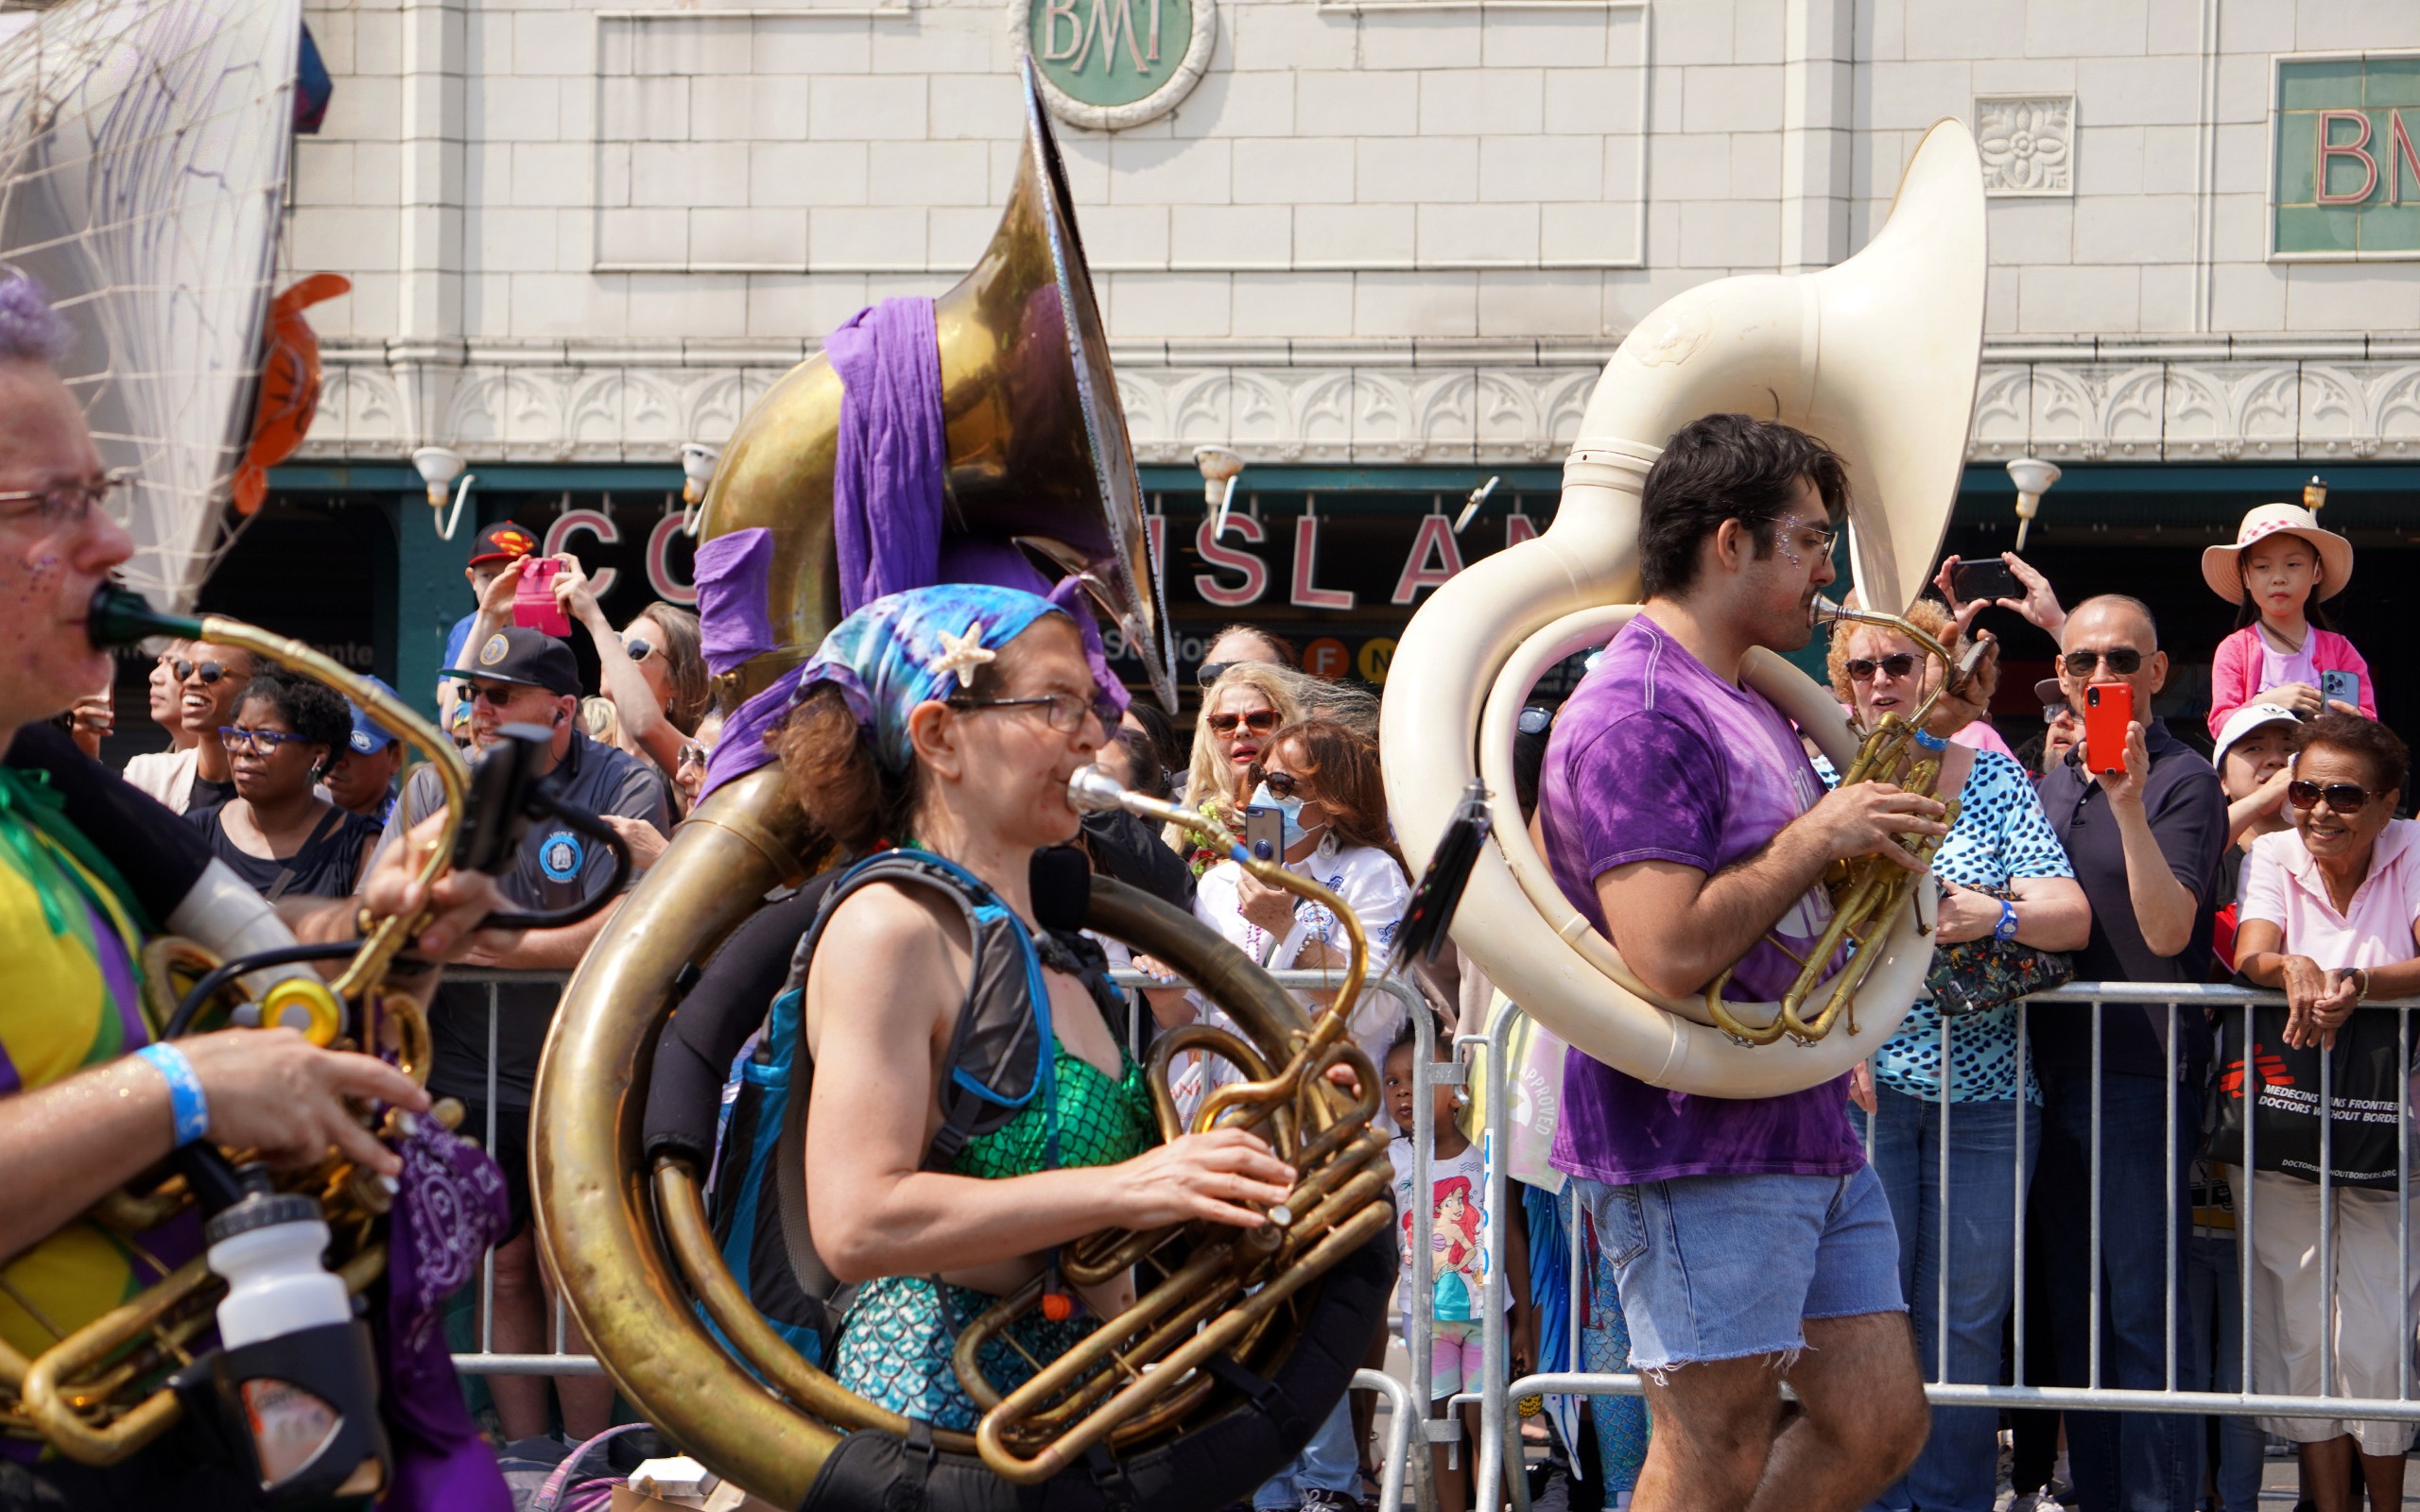 41st Annual Mermaid Parade procession in front of Stillwell Avenue Station